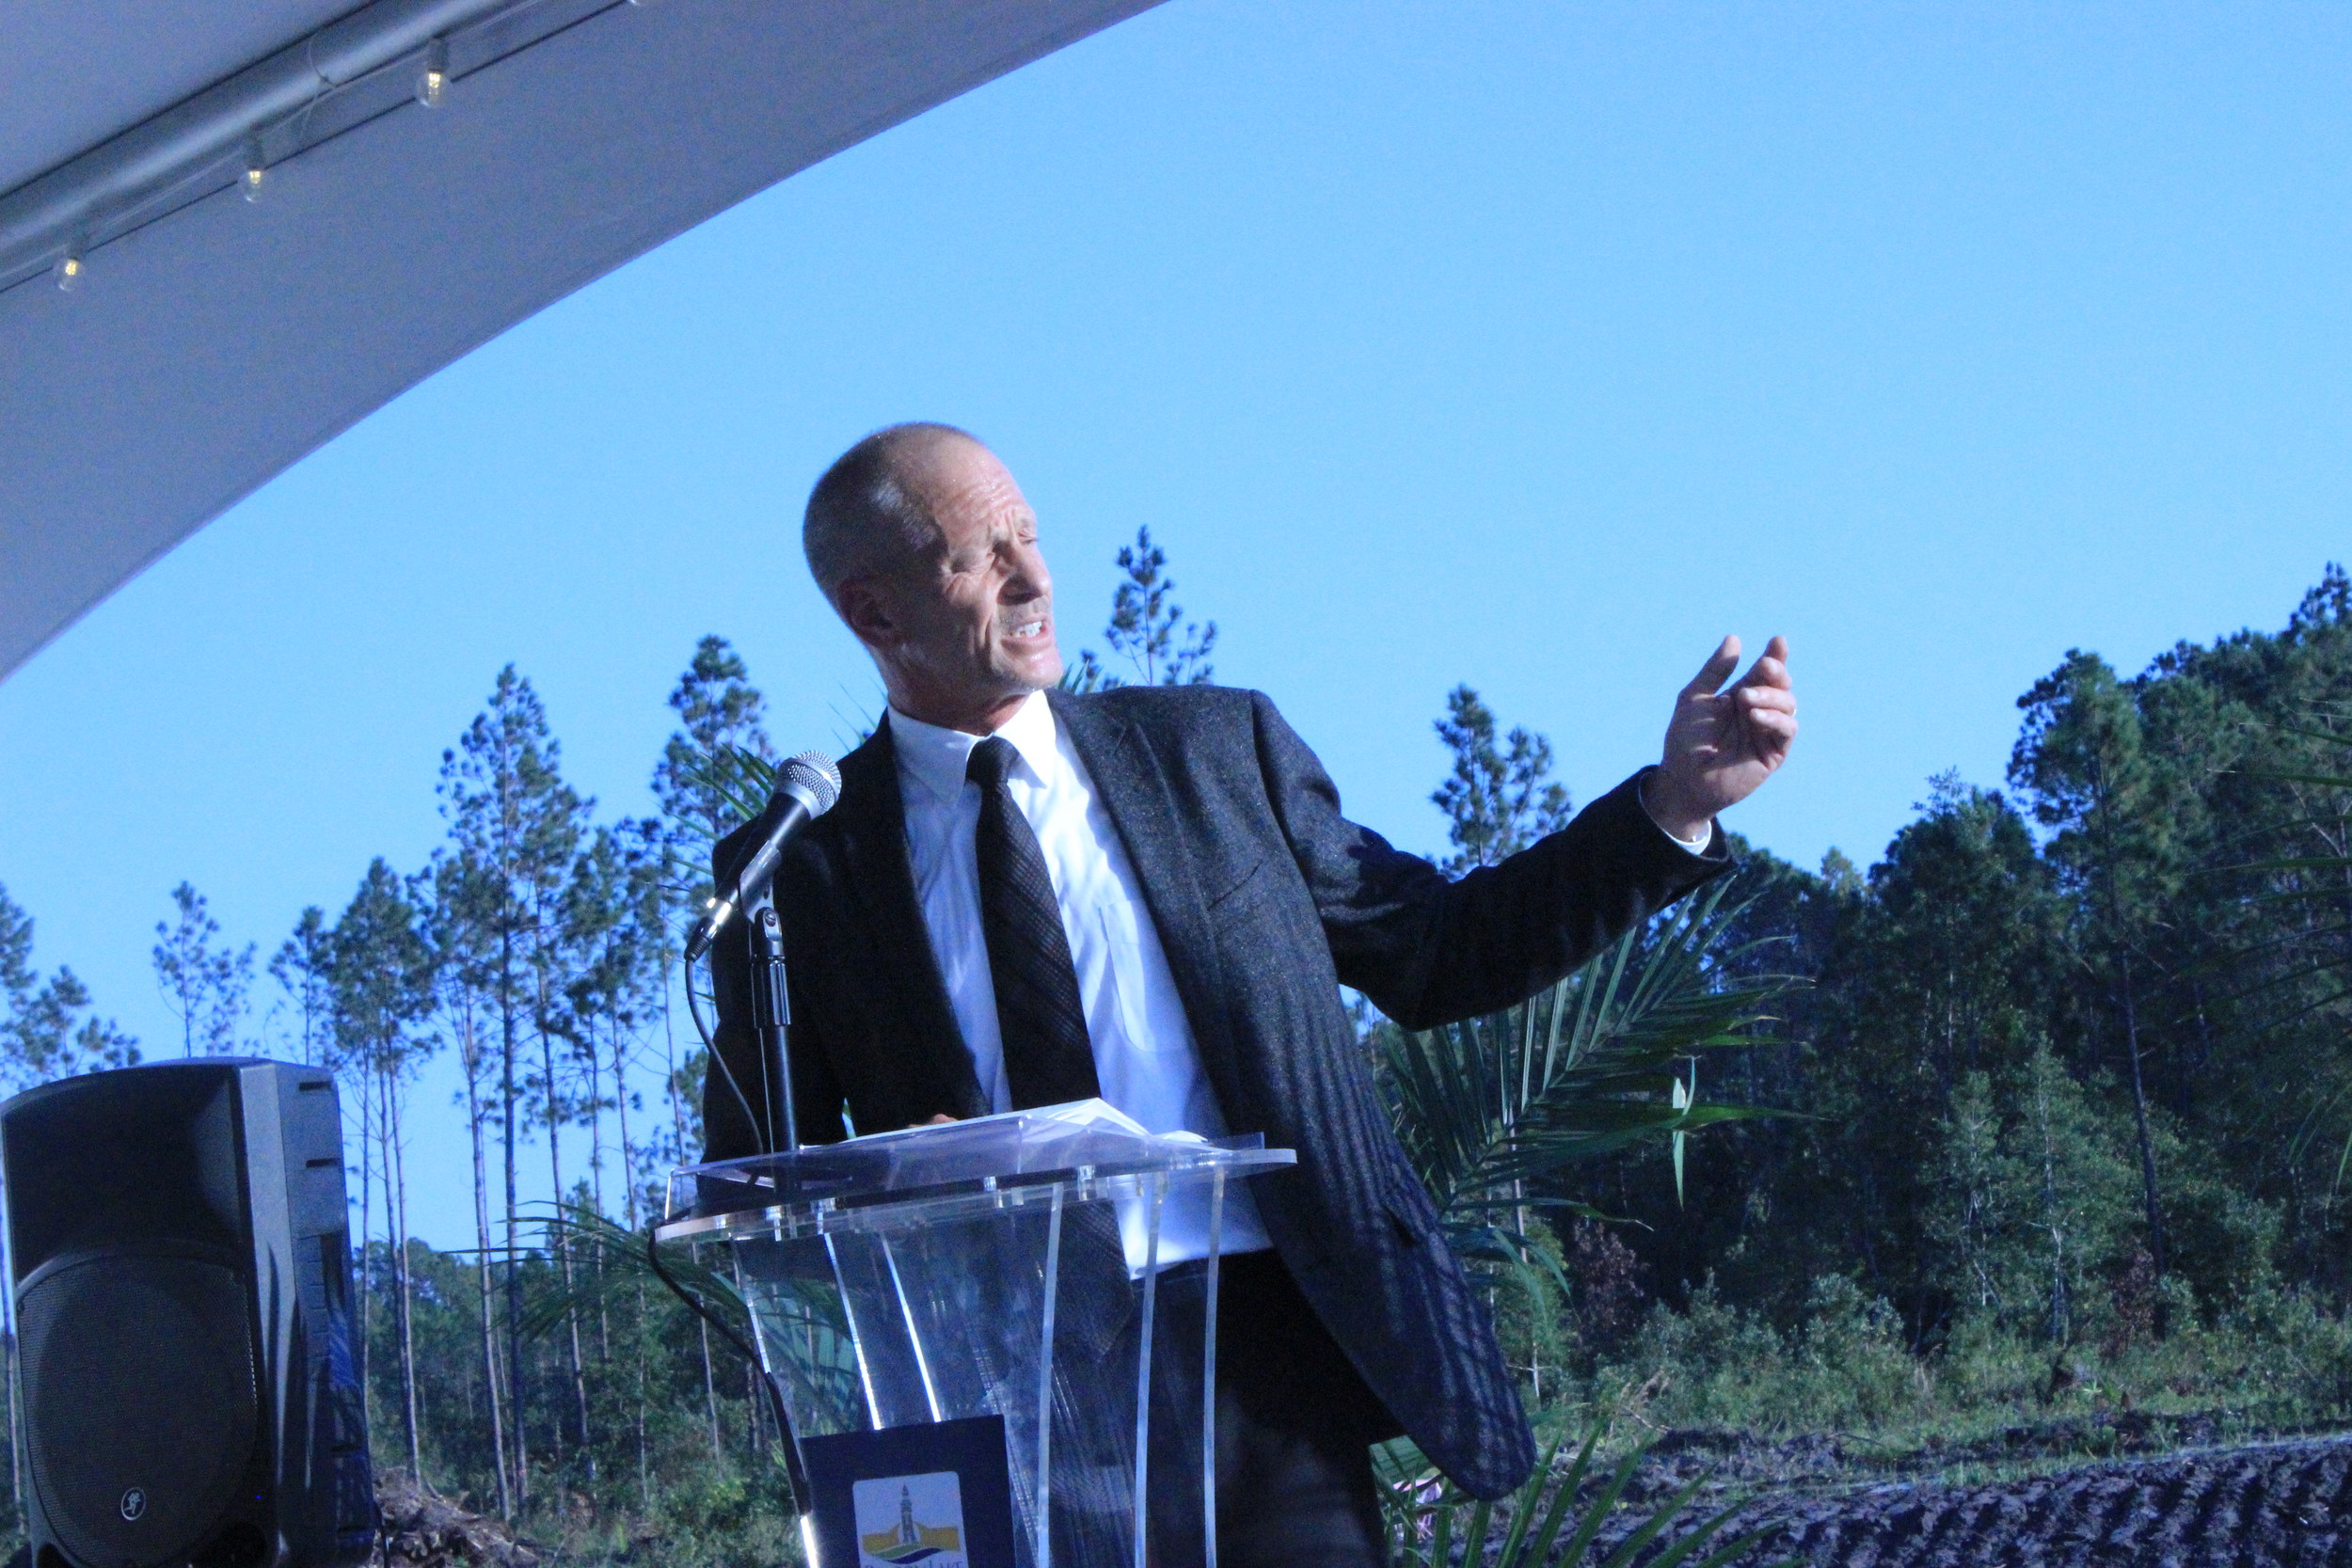 Bruce J. Parker, managing director of BBX Capital Real Estate, speaks at the Beacon Lake groundbreaking event.